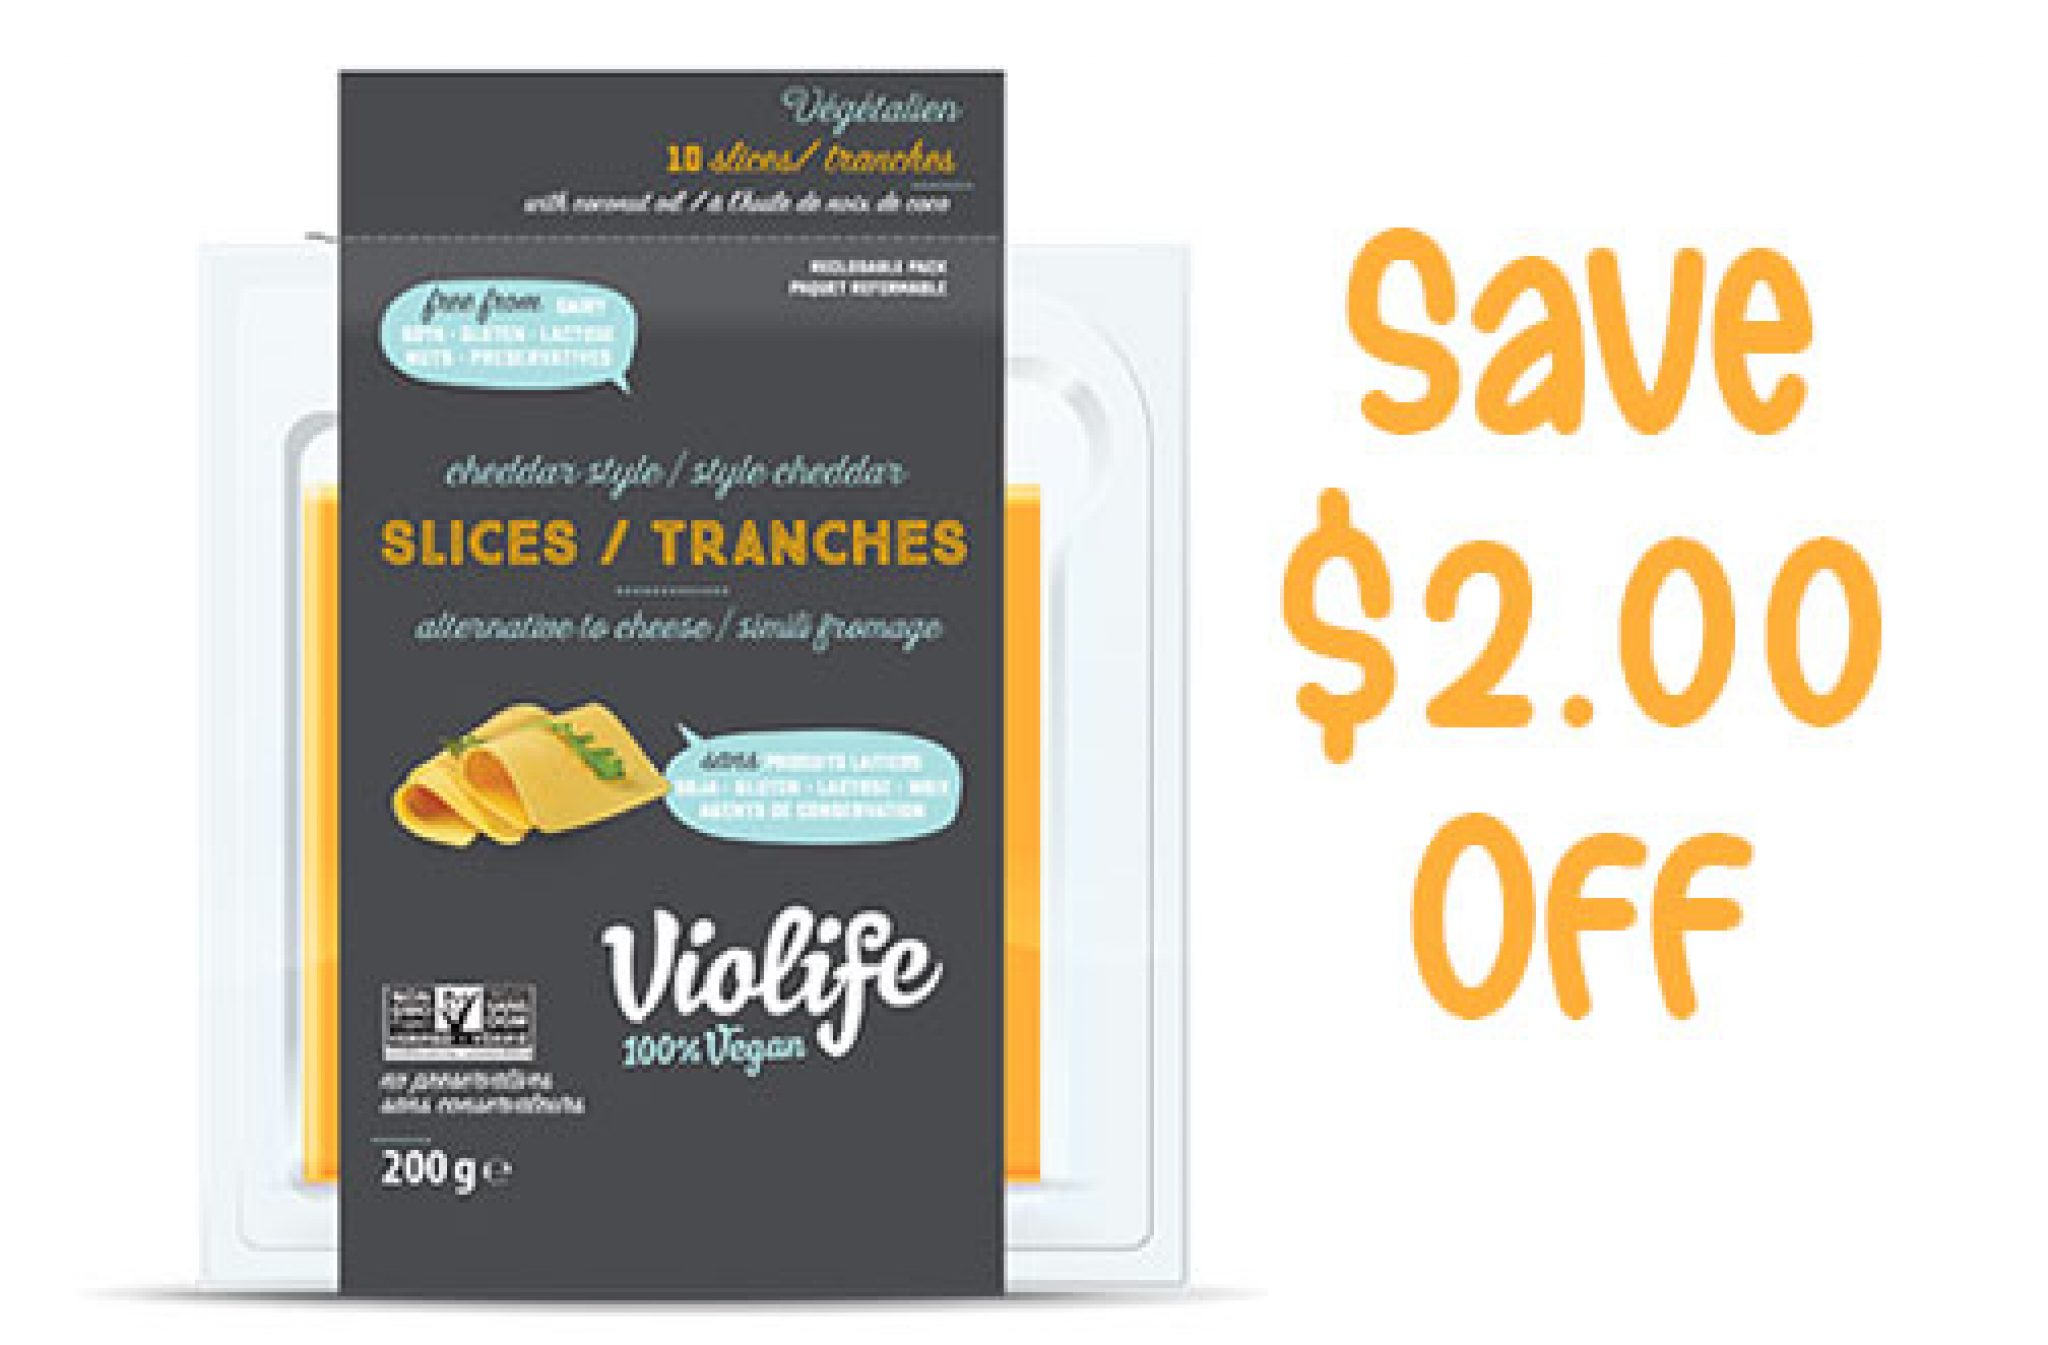 Violife Vegan Cheese Coupon — Deals from SaveaLoonie!